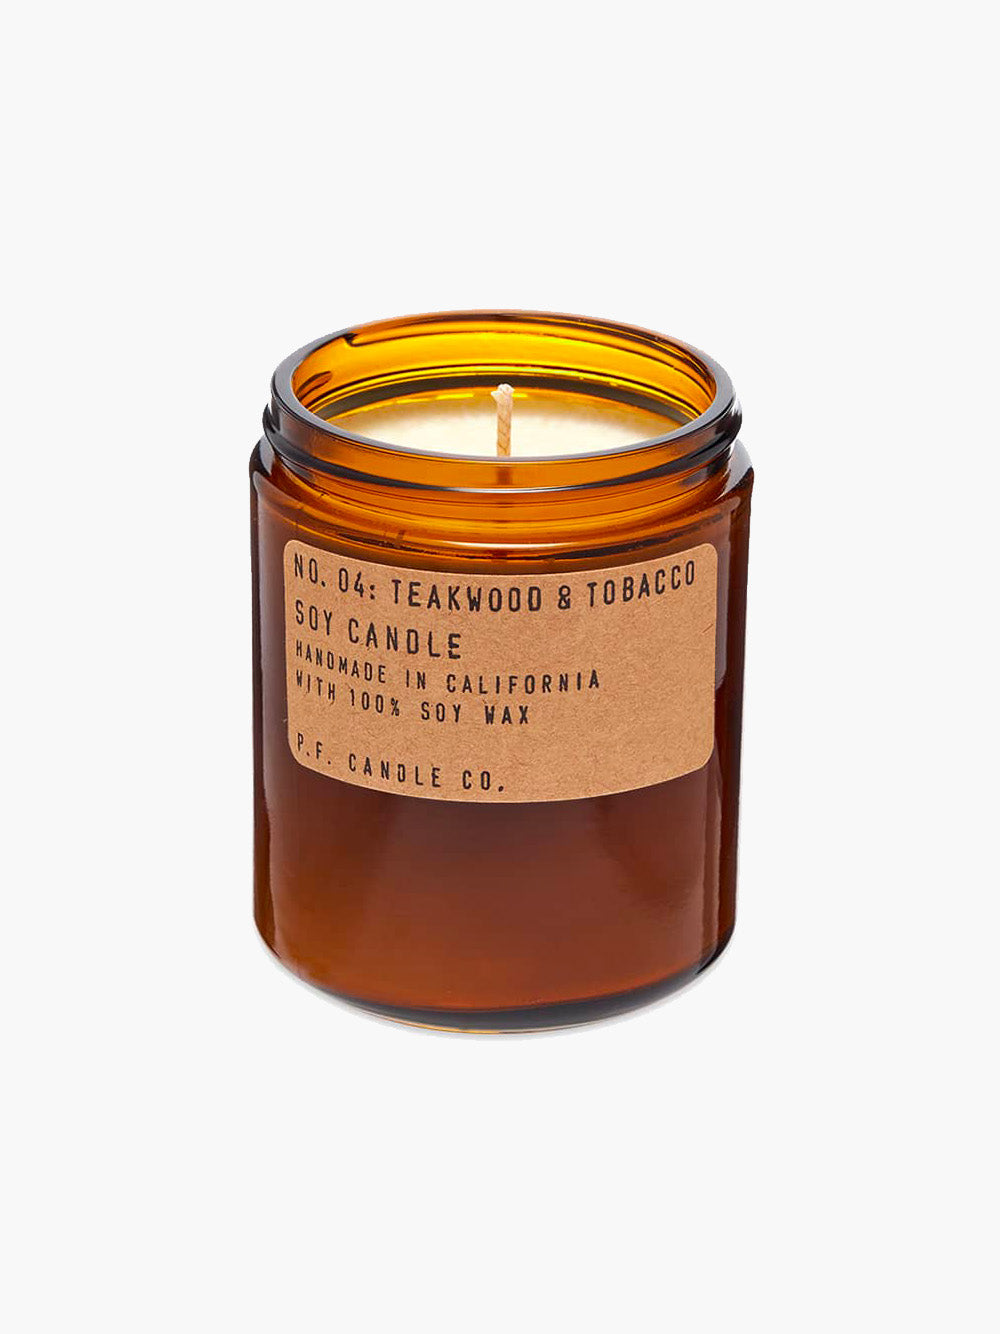 P.F. Candle Co. 204g Soy Candle - No.04 Teakwood & Tobacco